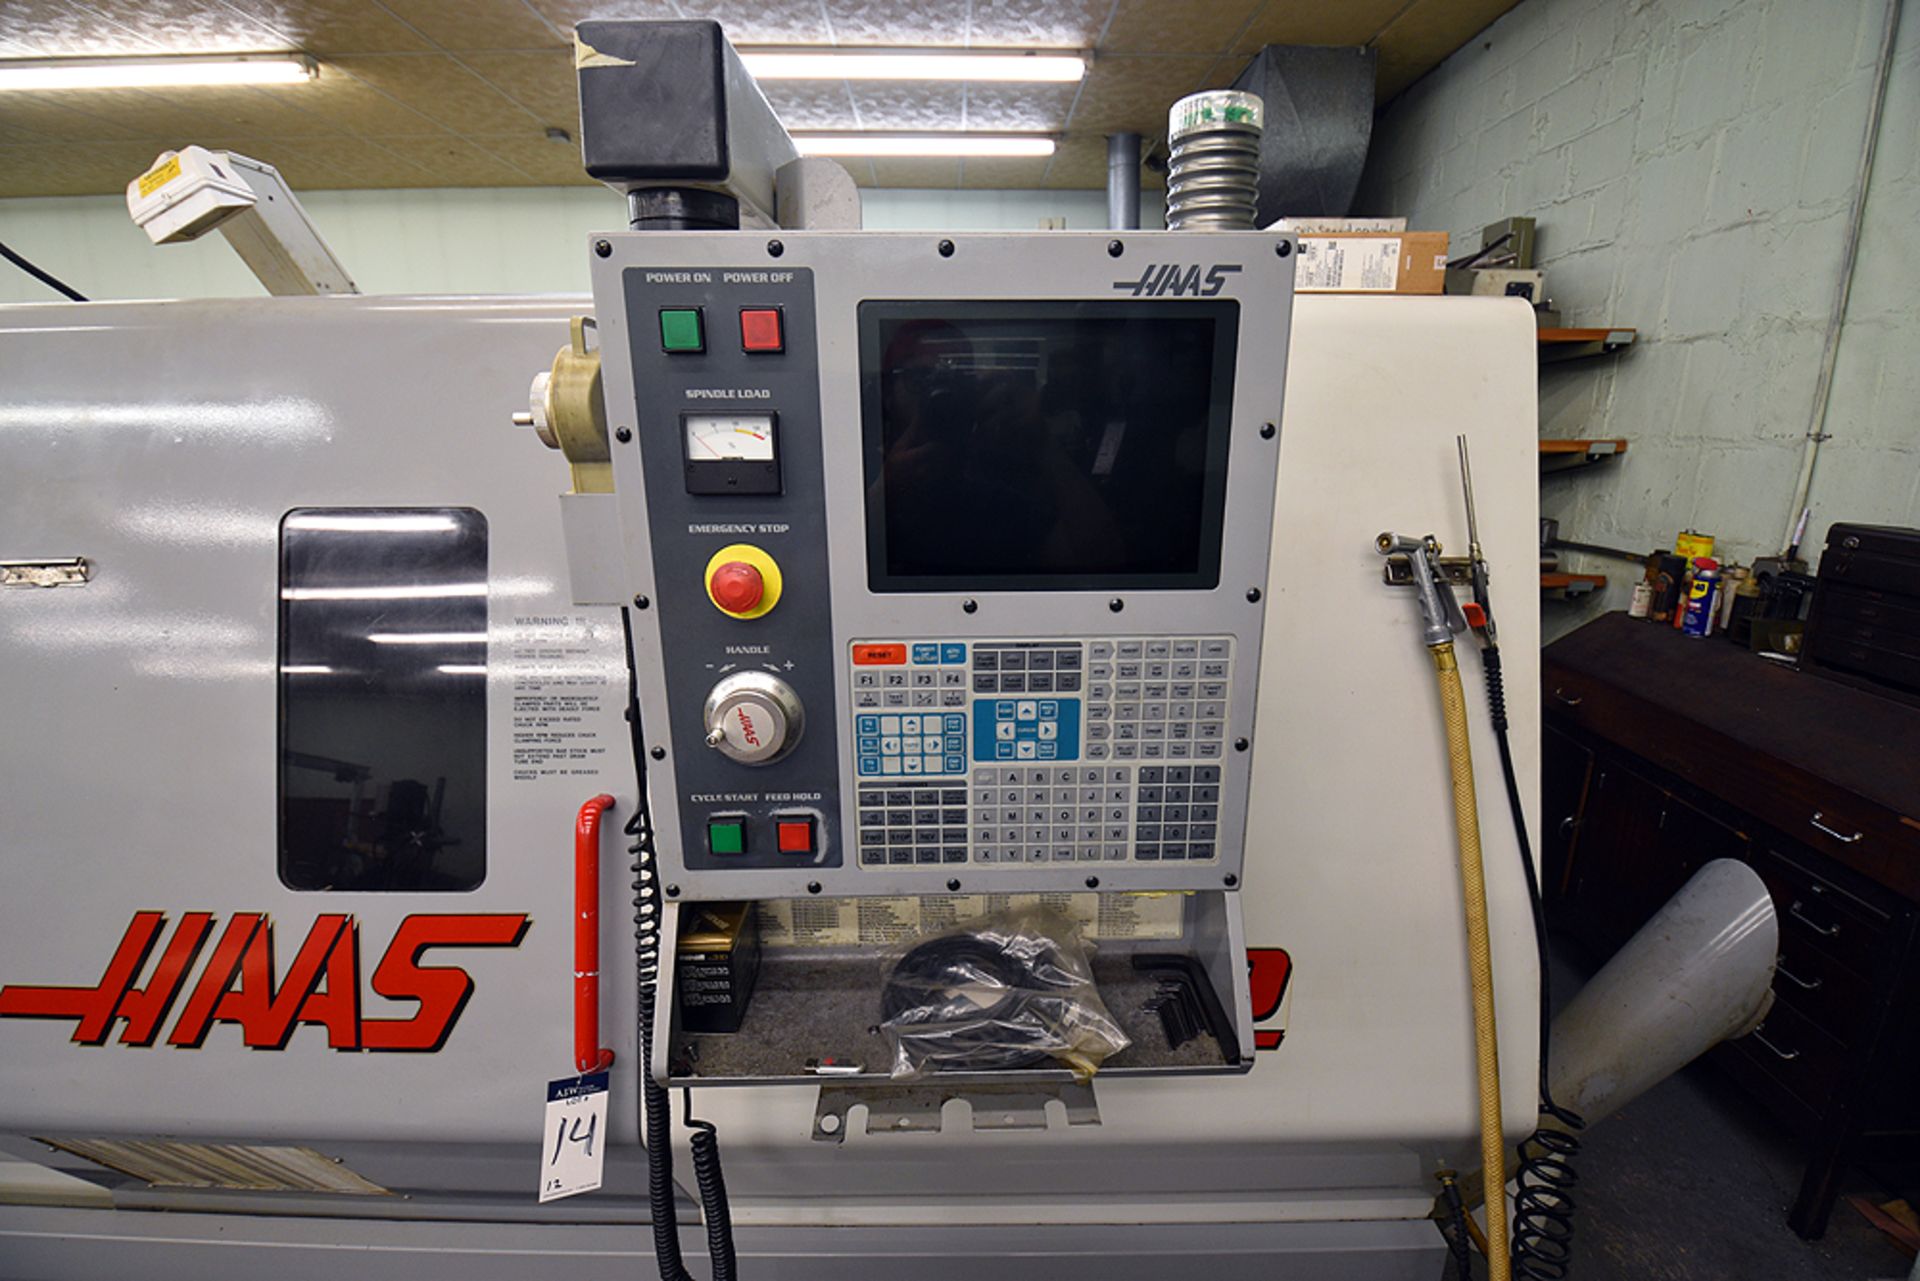 2002 Haas SL30T CNC Lathe Serial Number: 65057, 208v/230v, 3-Phase w/Rexroth Hydraulic Power Unit - Image 10 of 23